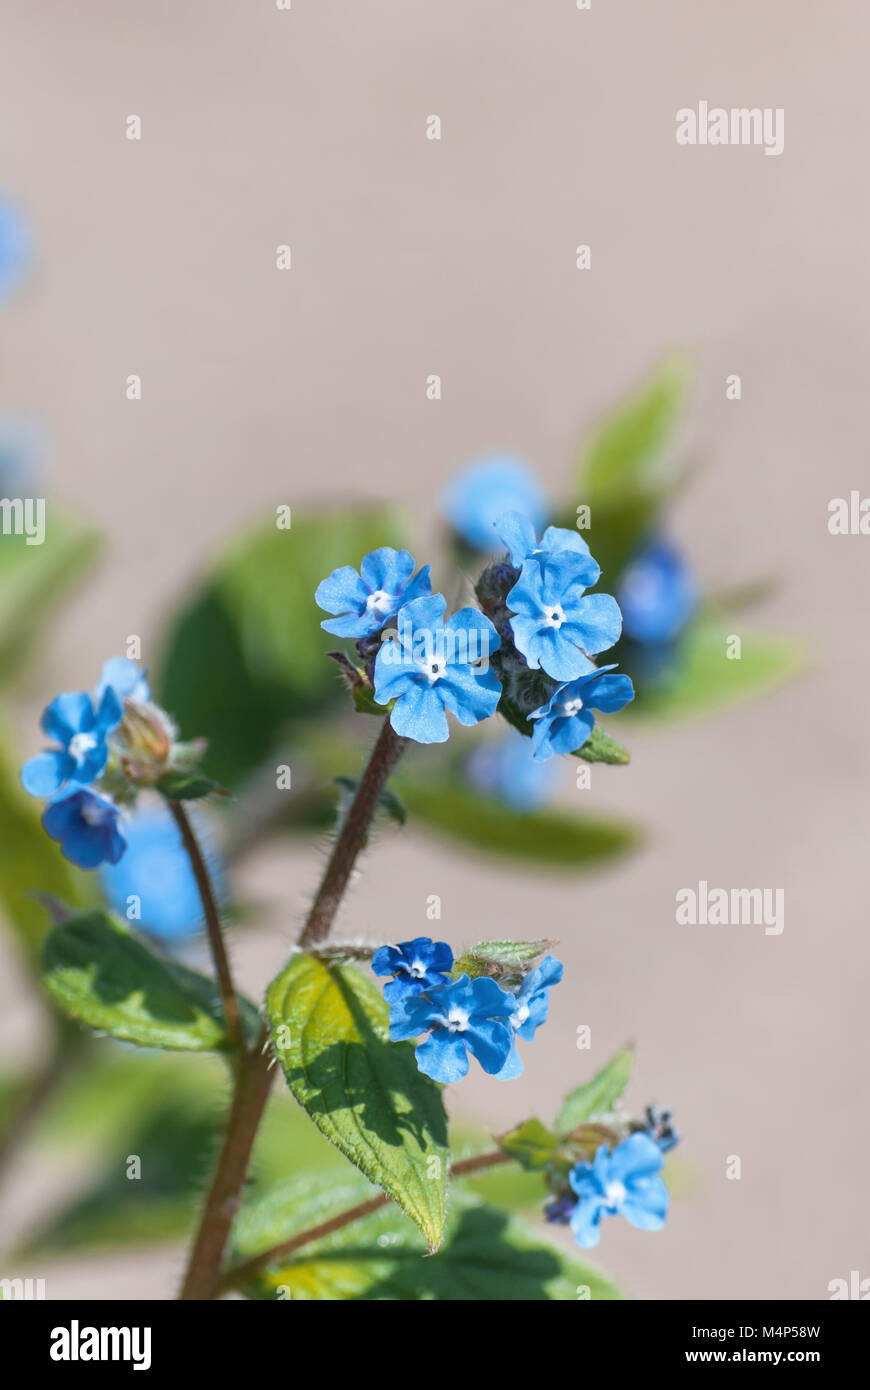 Close up of small, blue Forget Me Not flowers on leaved plant stem with neutral beige stone wall background providing copy space above. Stock Photo